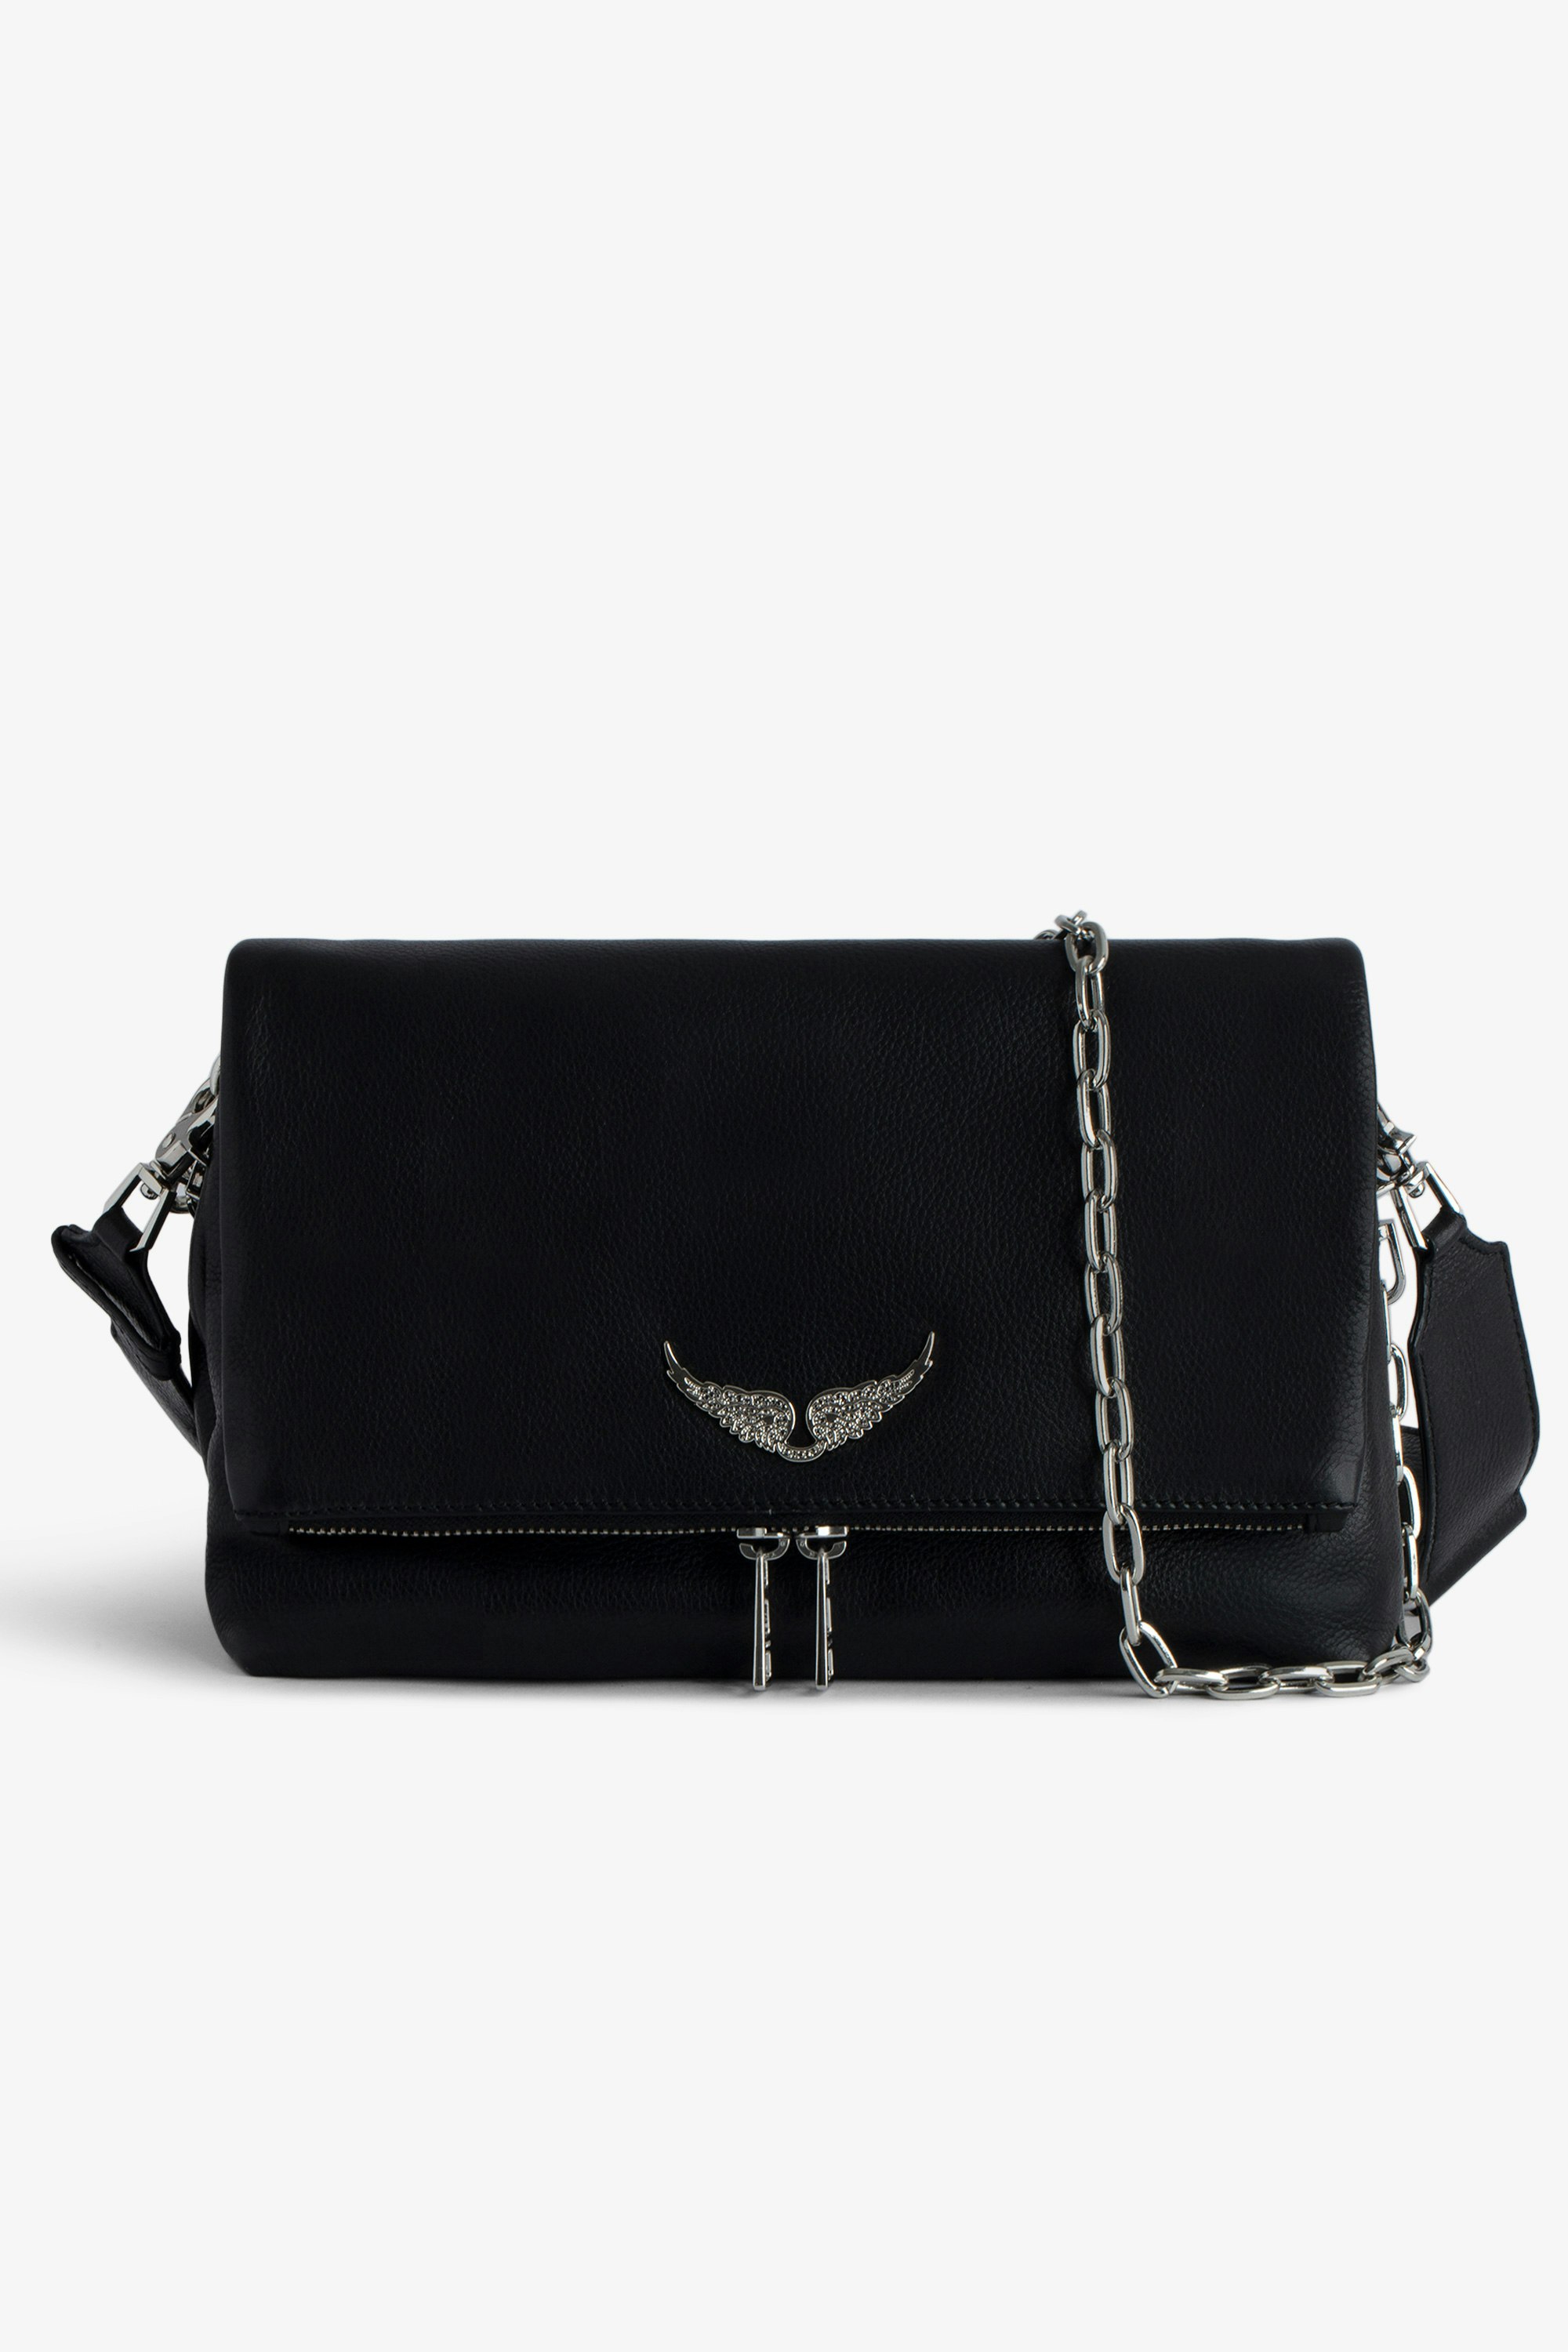 Rocky Bag - Rocky iconic women’s black grained leather bag.